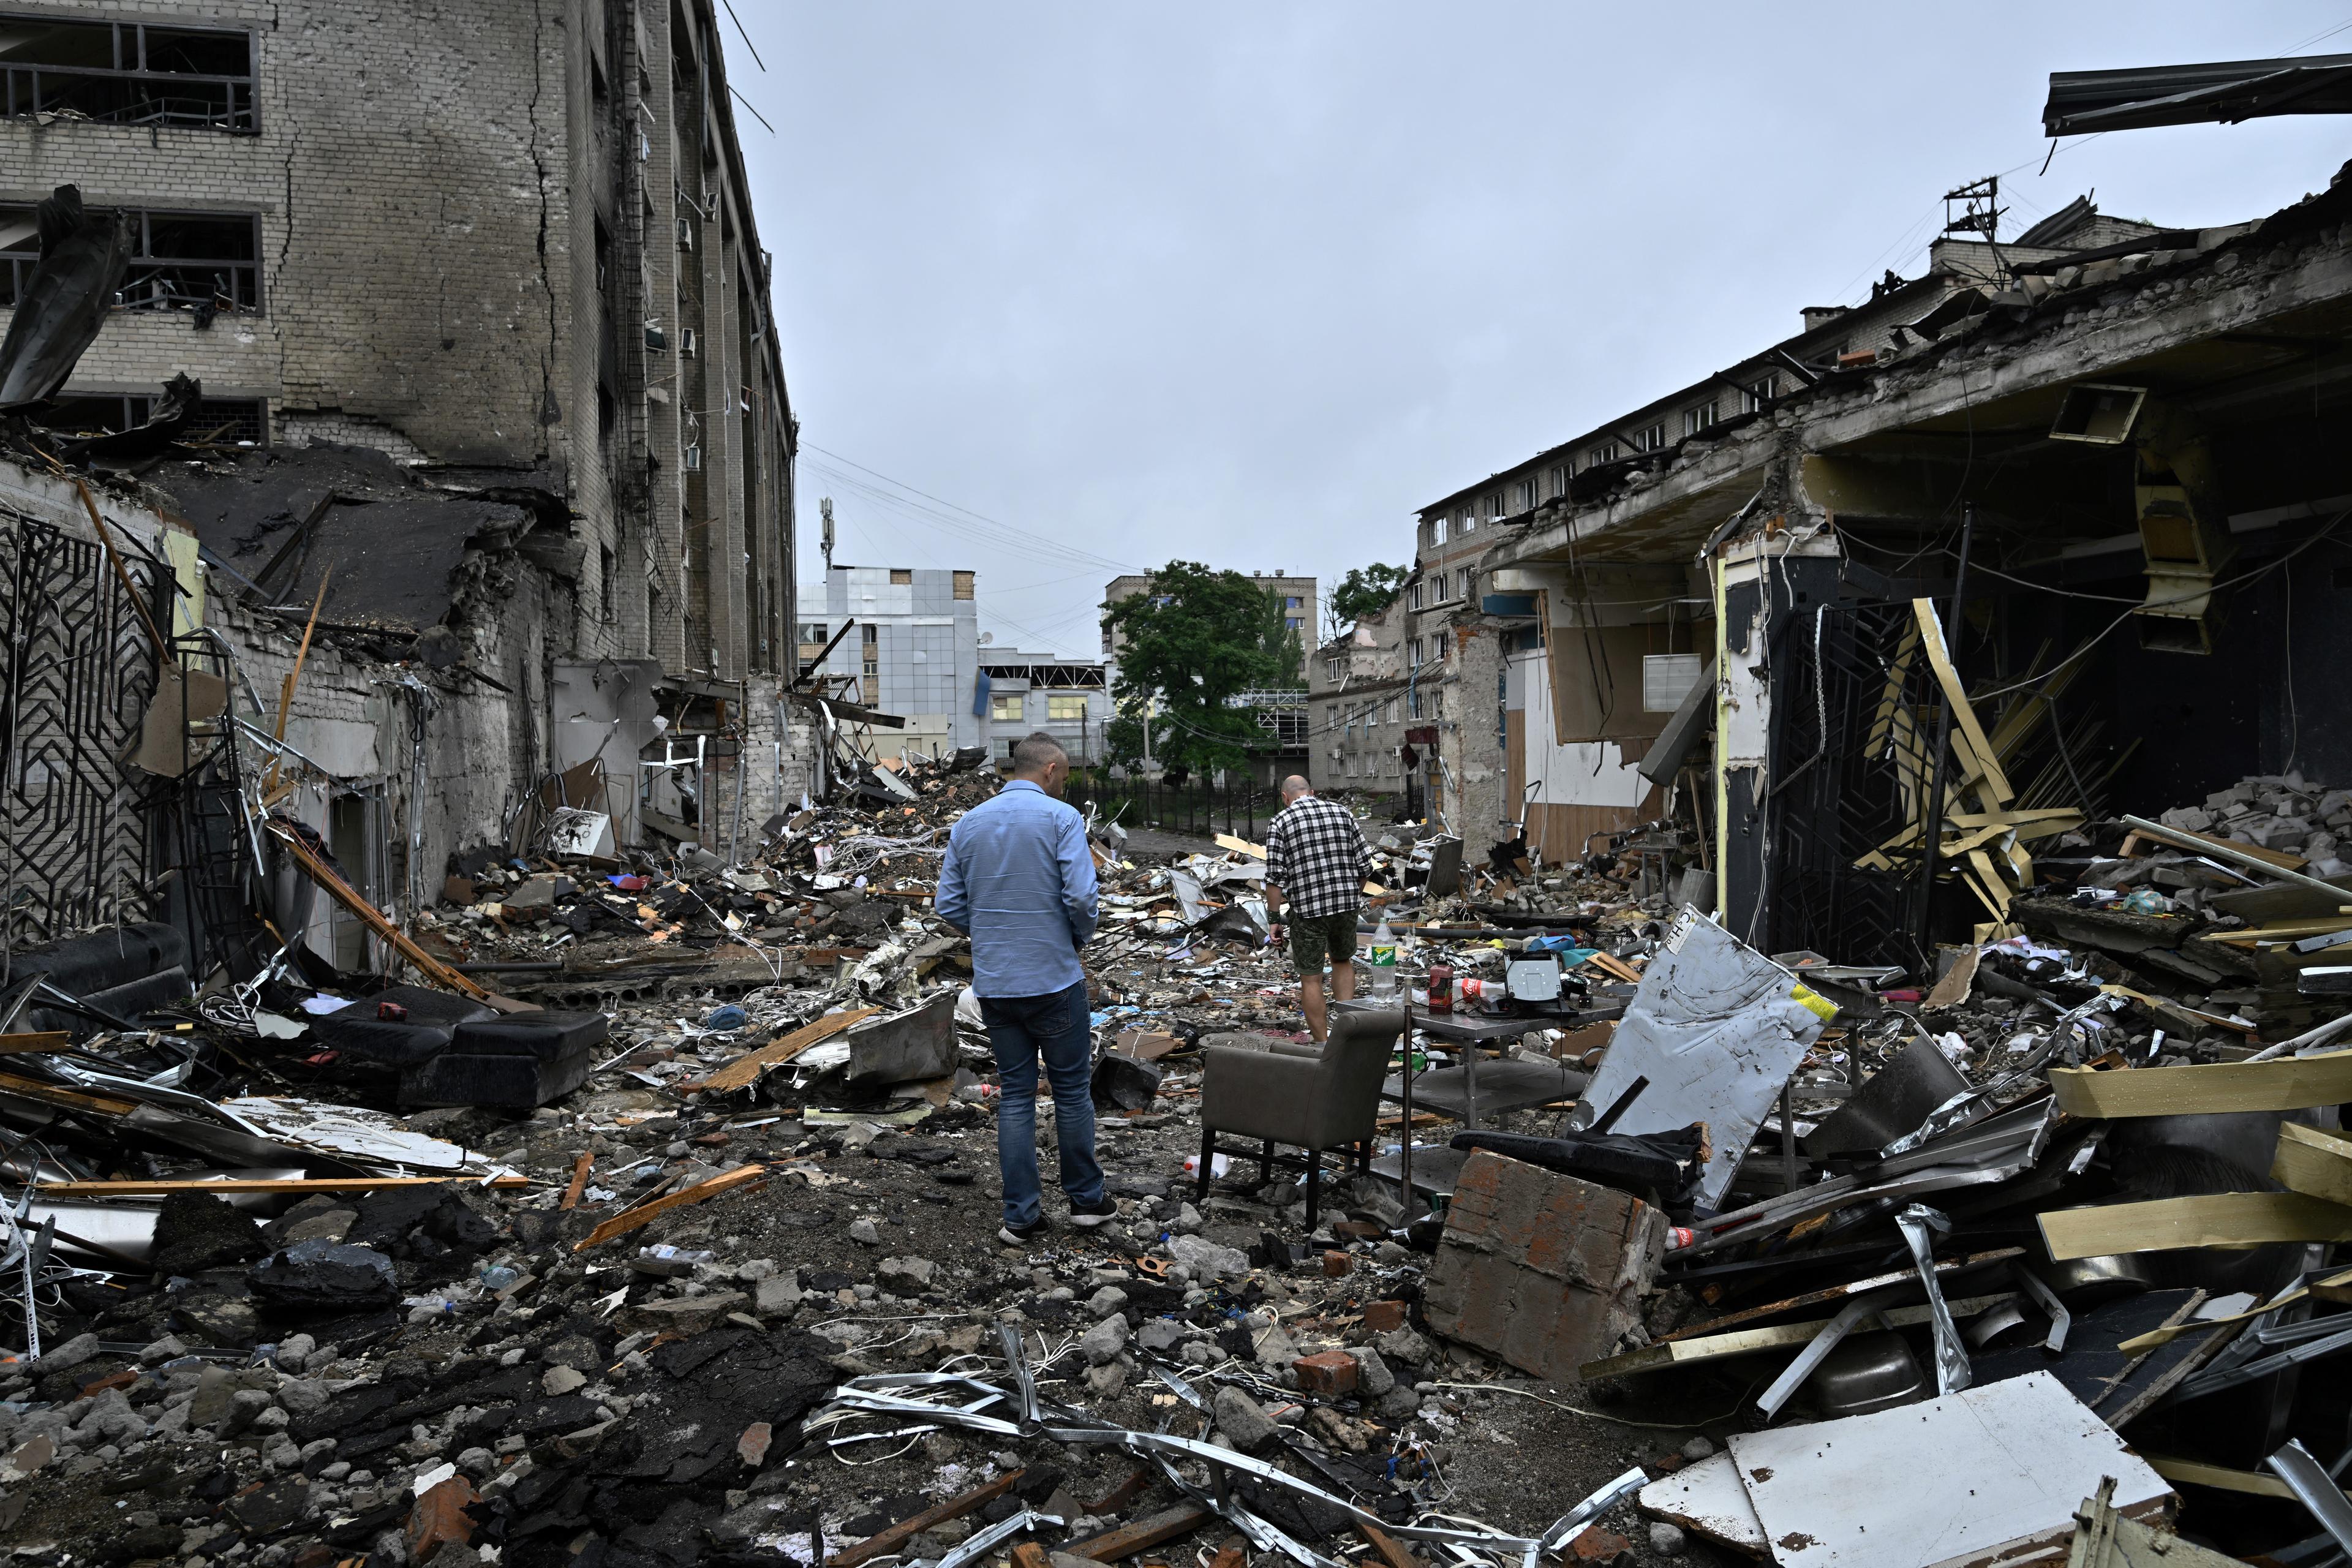 Local residents walk among debris following a Russian missile strike in the center of Kramatorsk on June 29, 2023, amid the Russian invasion of Ukraine. - The toll from a Russian missile strike on a restaurant in eastern Ukraine rose to 12 dead and at least 60 wounded on June 28, 2023 morning, including children, as the Kremlin insisted Russian forces only hit military-linked targets. (Photo by Genya SAVILOV / AFP)